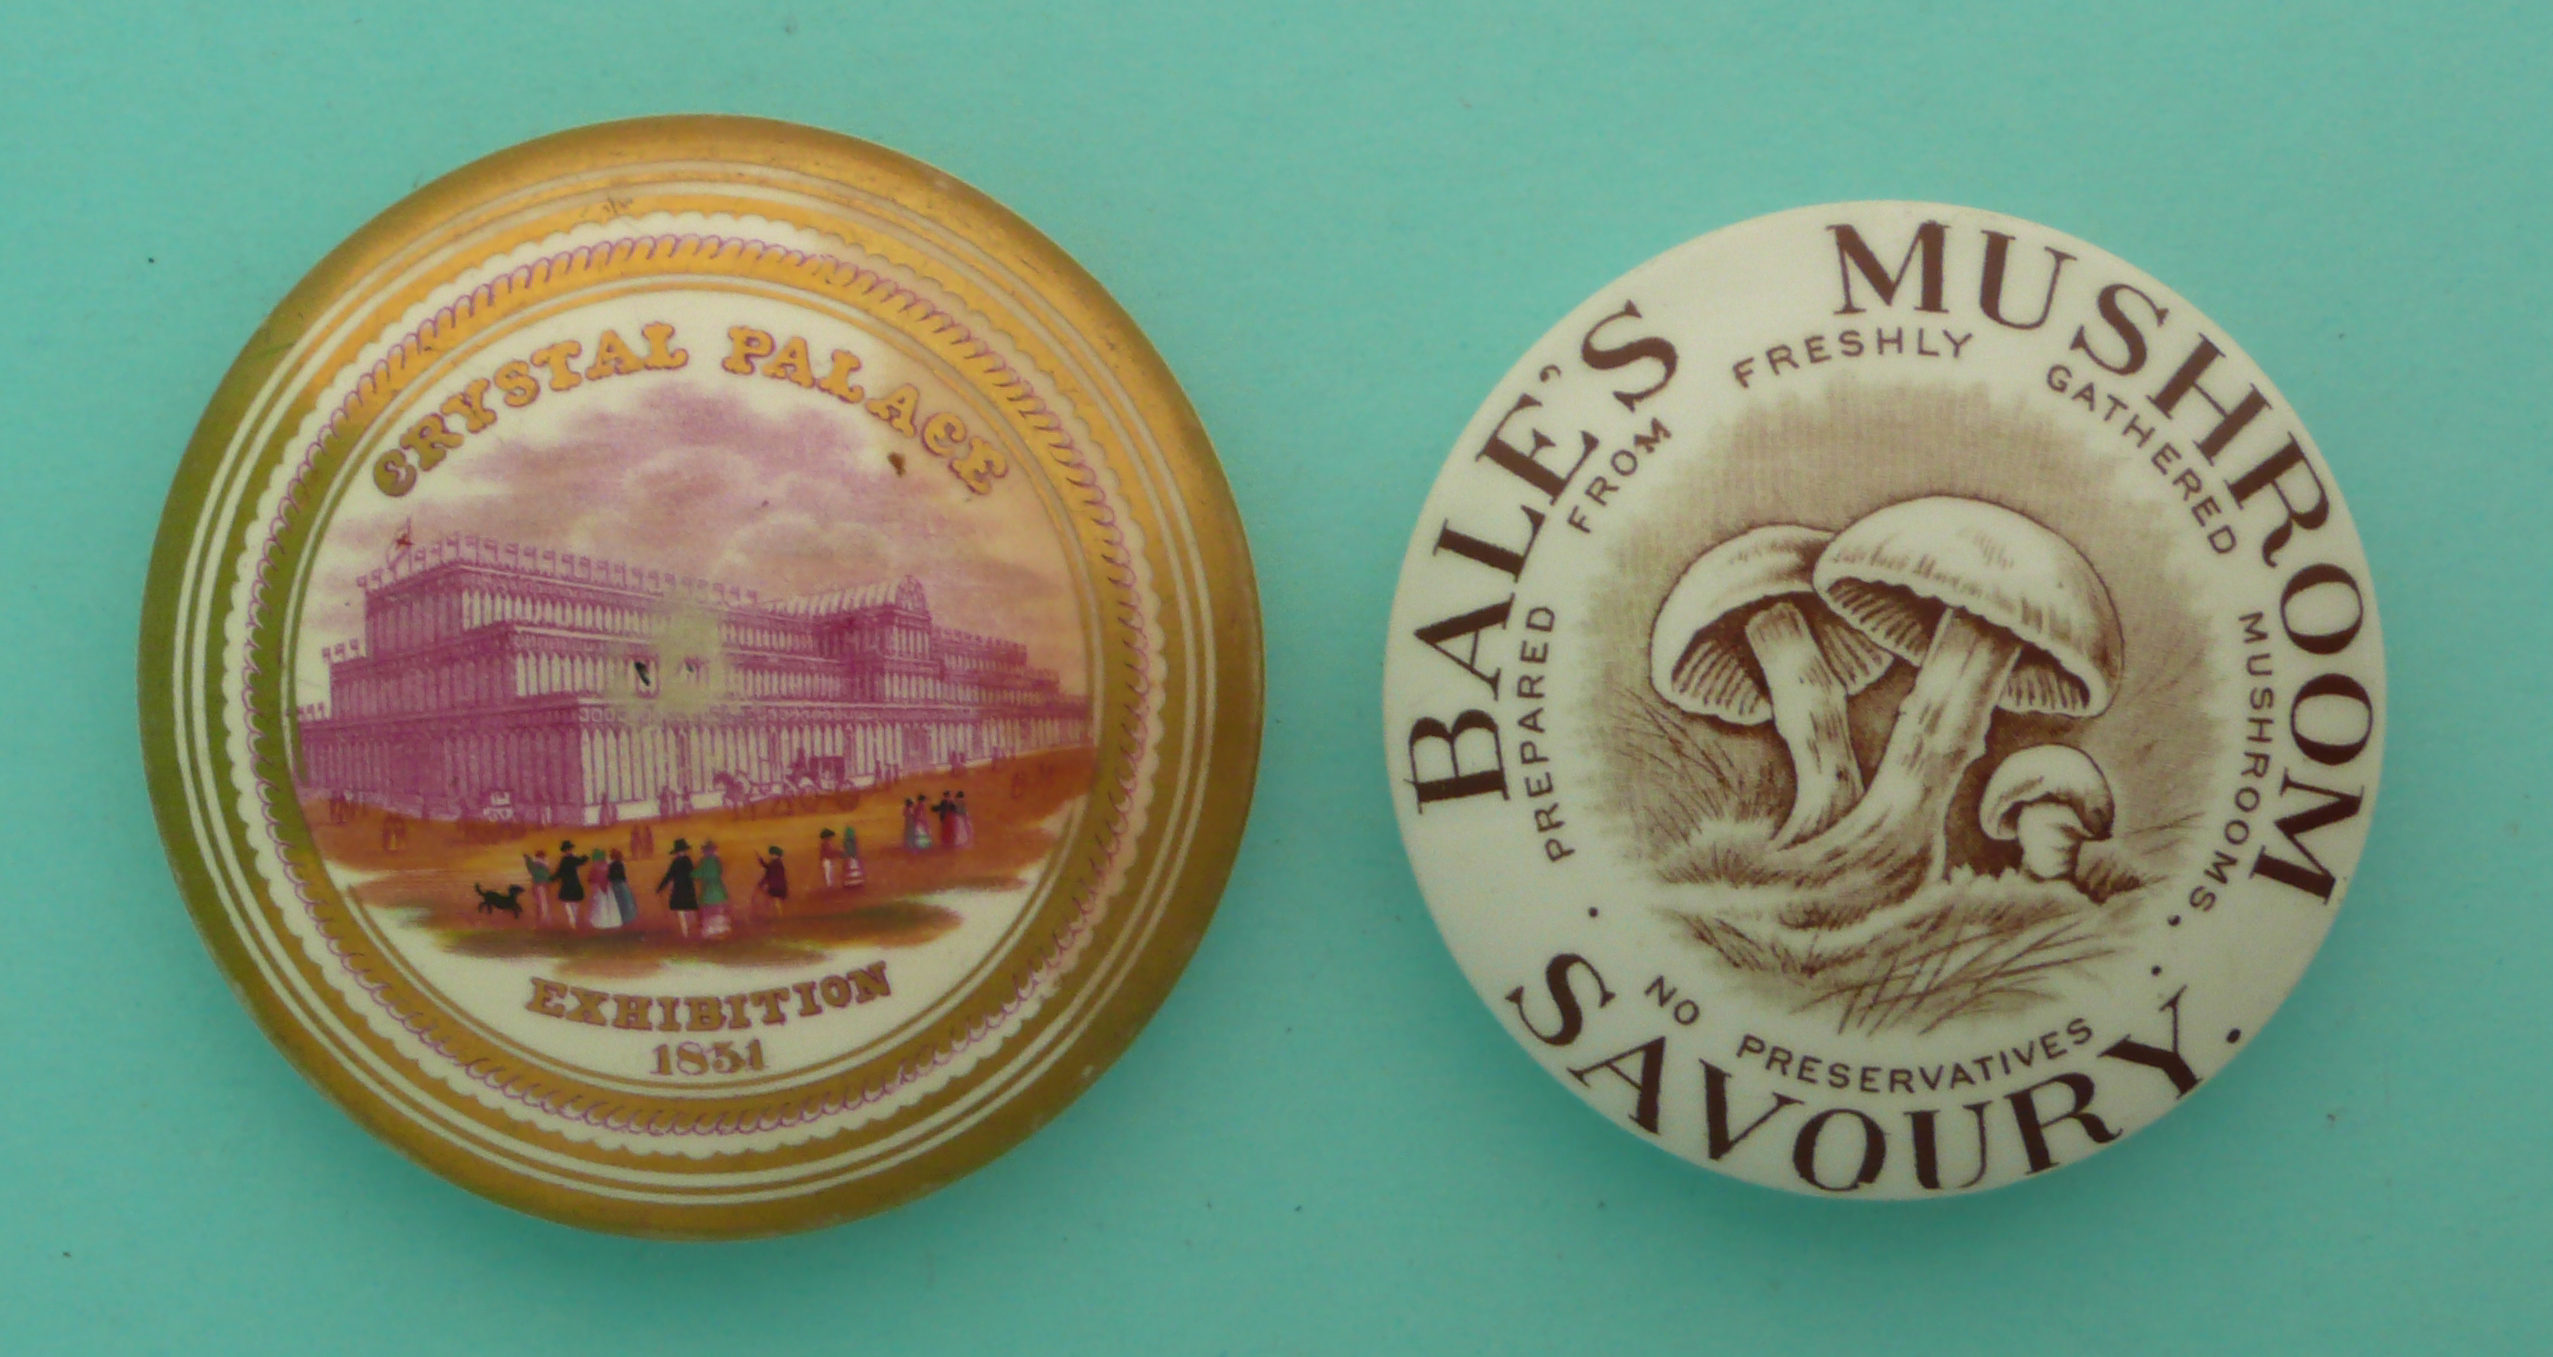 Crystal Palace Exhibition 1851, pink print with gilt decoration, 95mm, rubbed and Bale’s Savoury